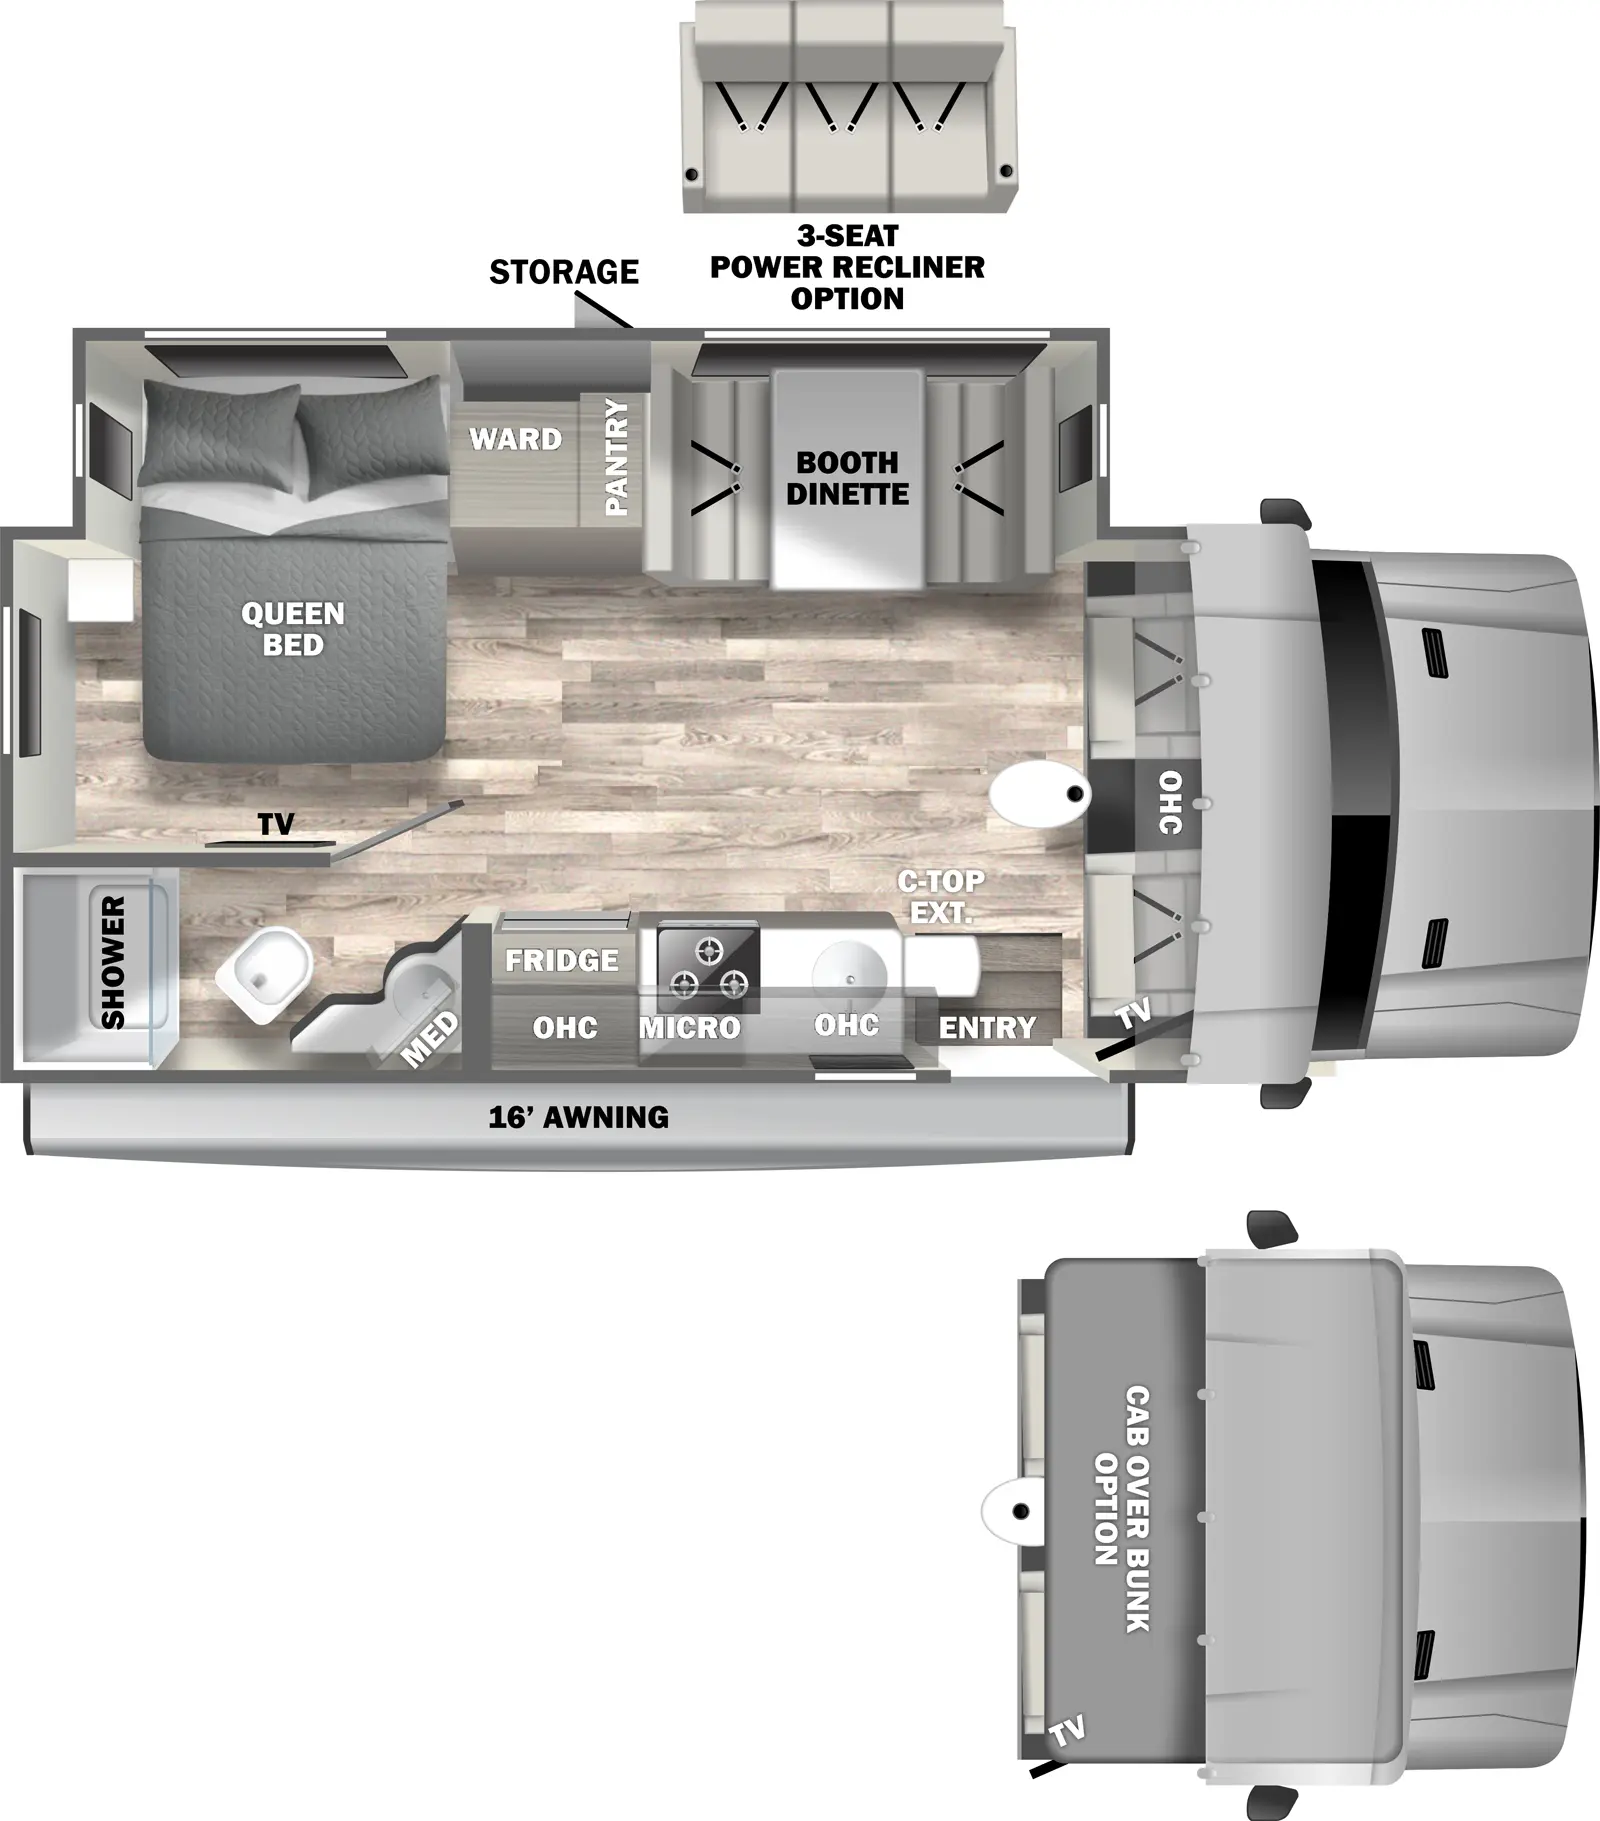 The 24FW has one slideout and one entry. Exterior features a 16 foot awning and storage. Interior layout front to back: front cockpit with overhead cabinets (optional cab-over bunk), table, and tv on door-side; off-door side slideout with booth dinette (optional 3-seat power recliner), pantry, wardrobe and queen bed with TV on inner wall across from it; door side entry, kitchen counter with extension, sink, overhead cabinet, microwave, cooktop, and refrigerator; rear door side full bathroom with medicine cabinet.